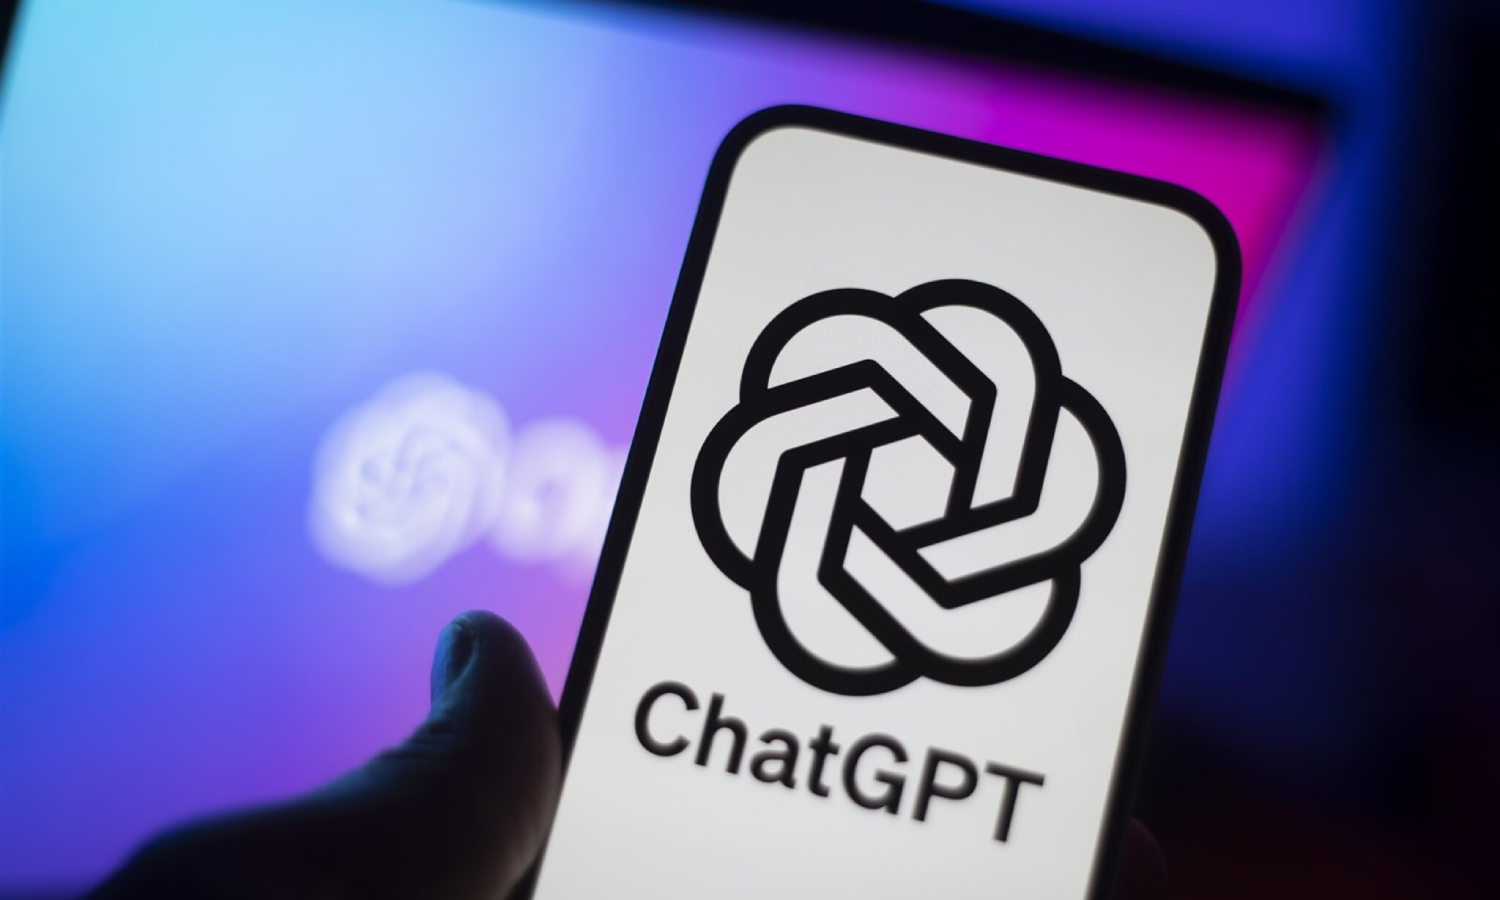 CHAT GPT APP IN PLAYSTORE